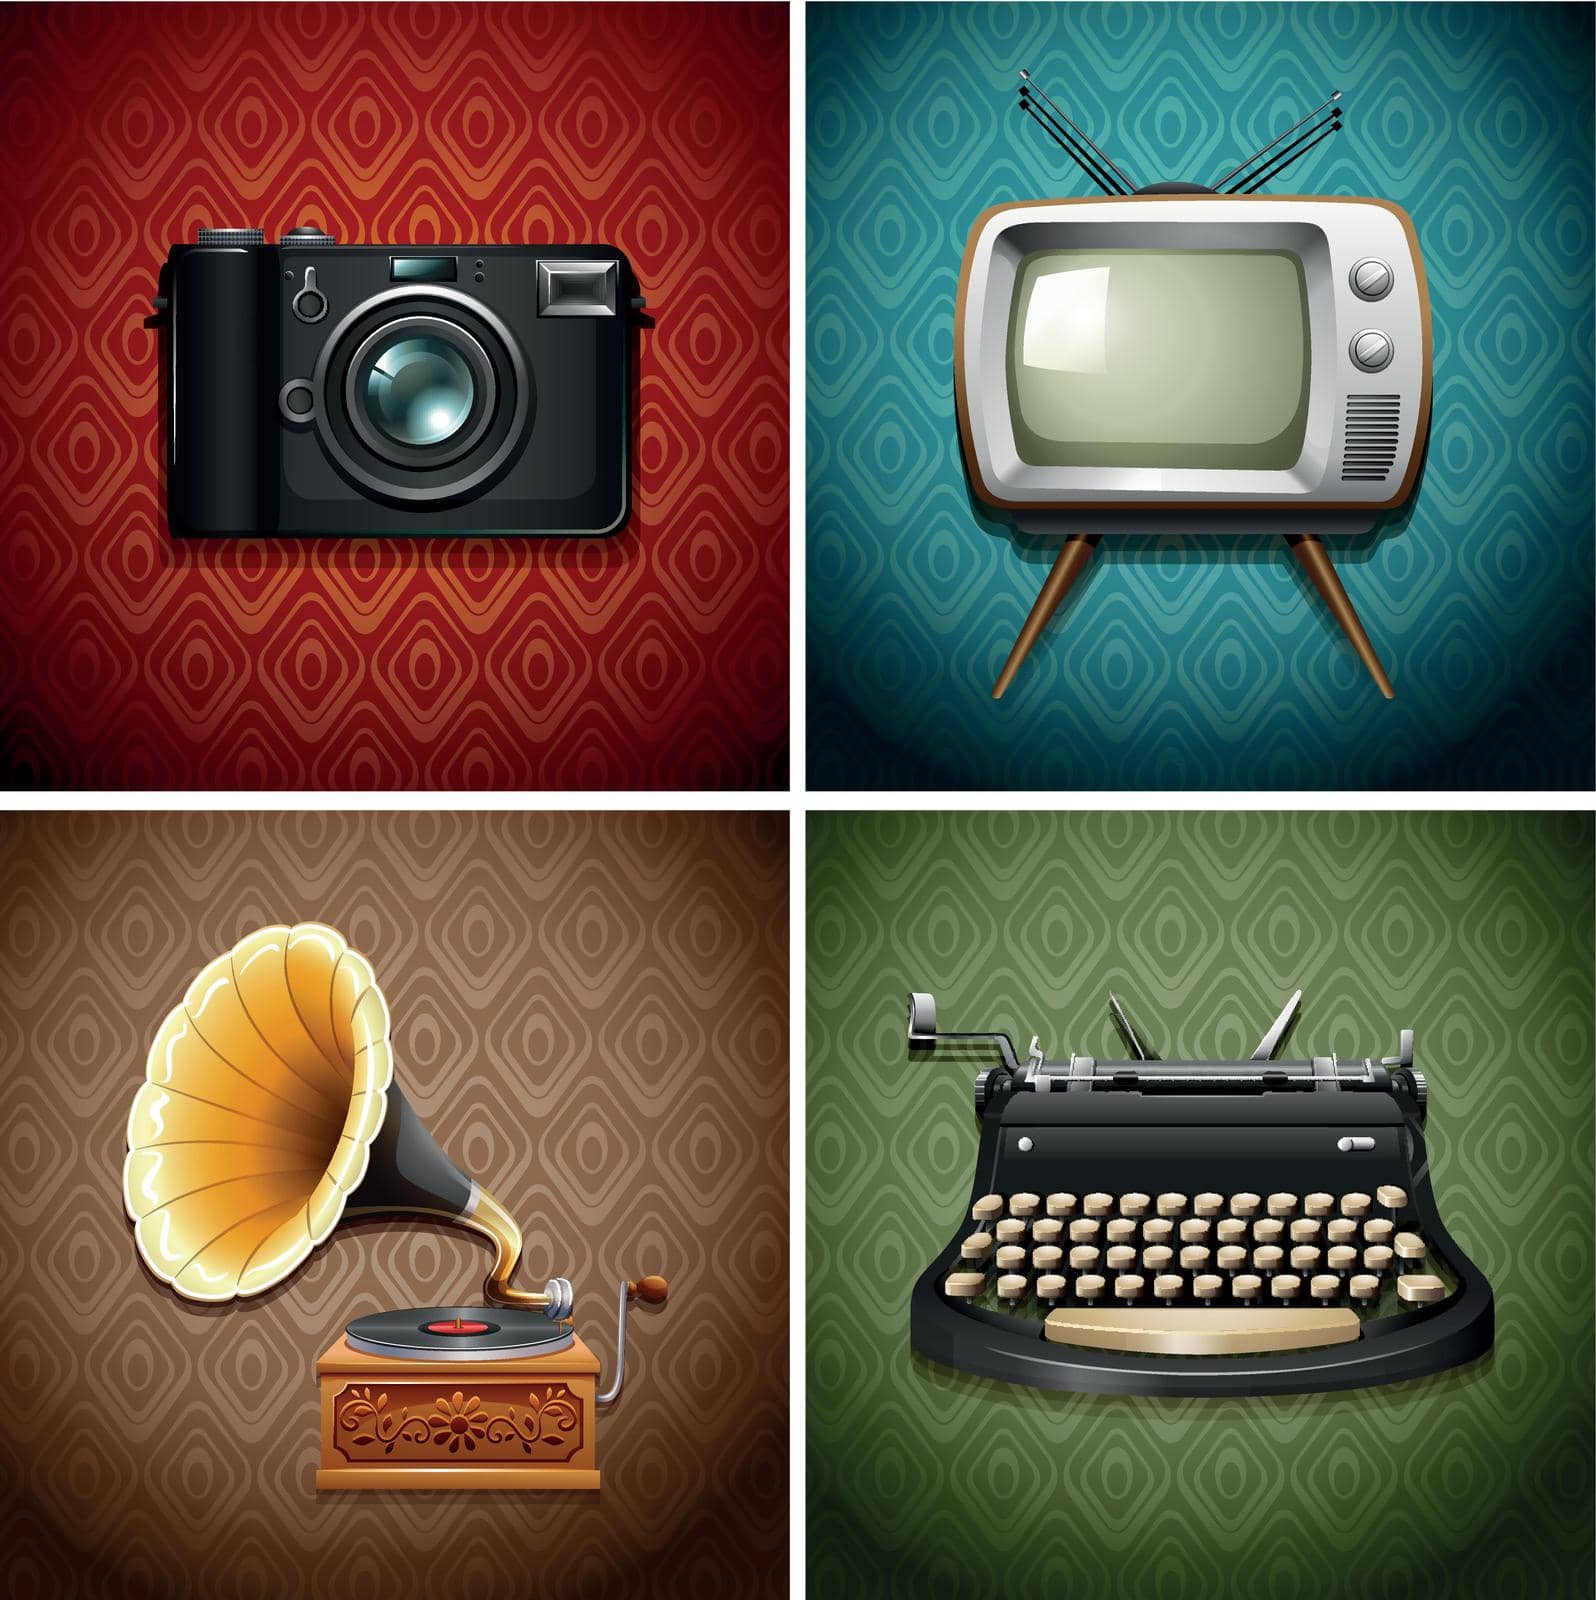 Retro media and audio devices by iimages